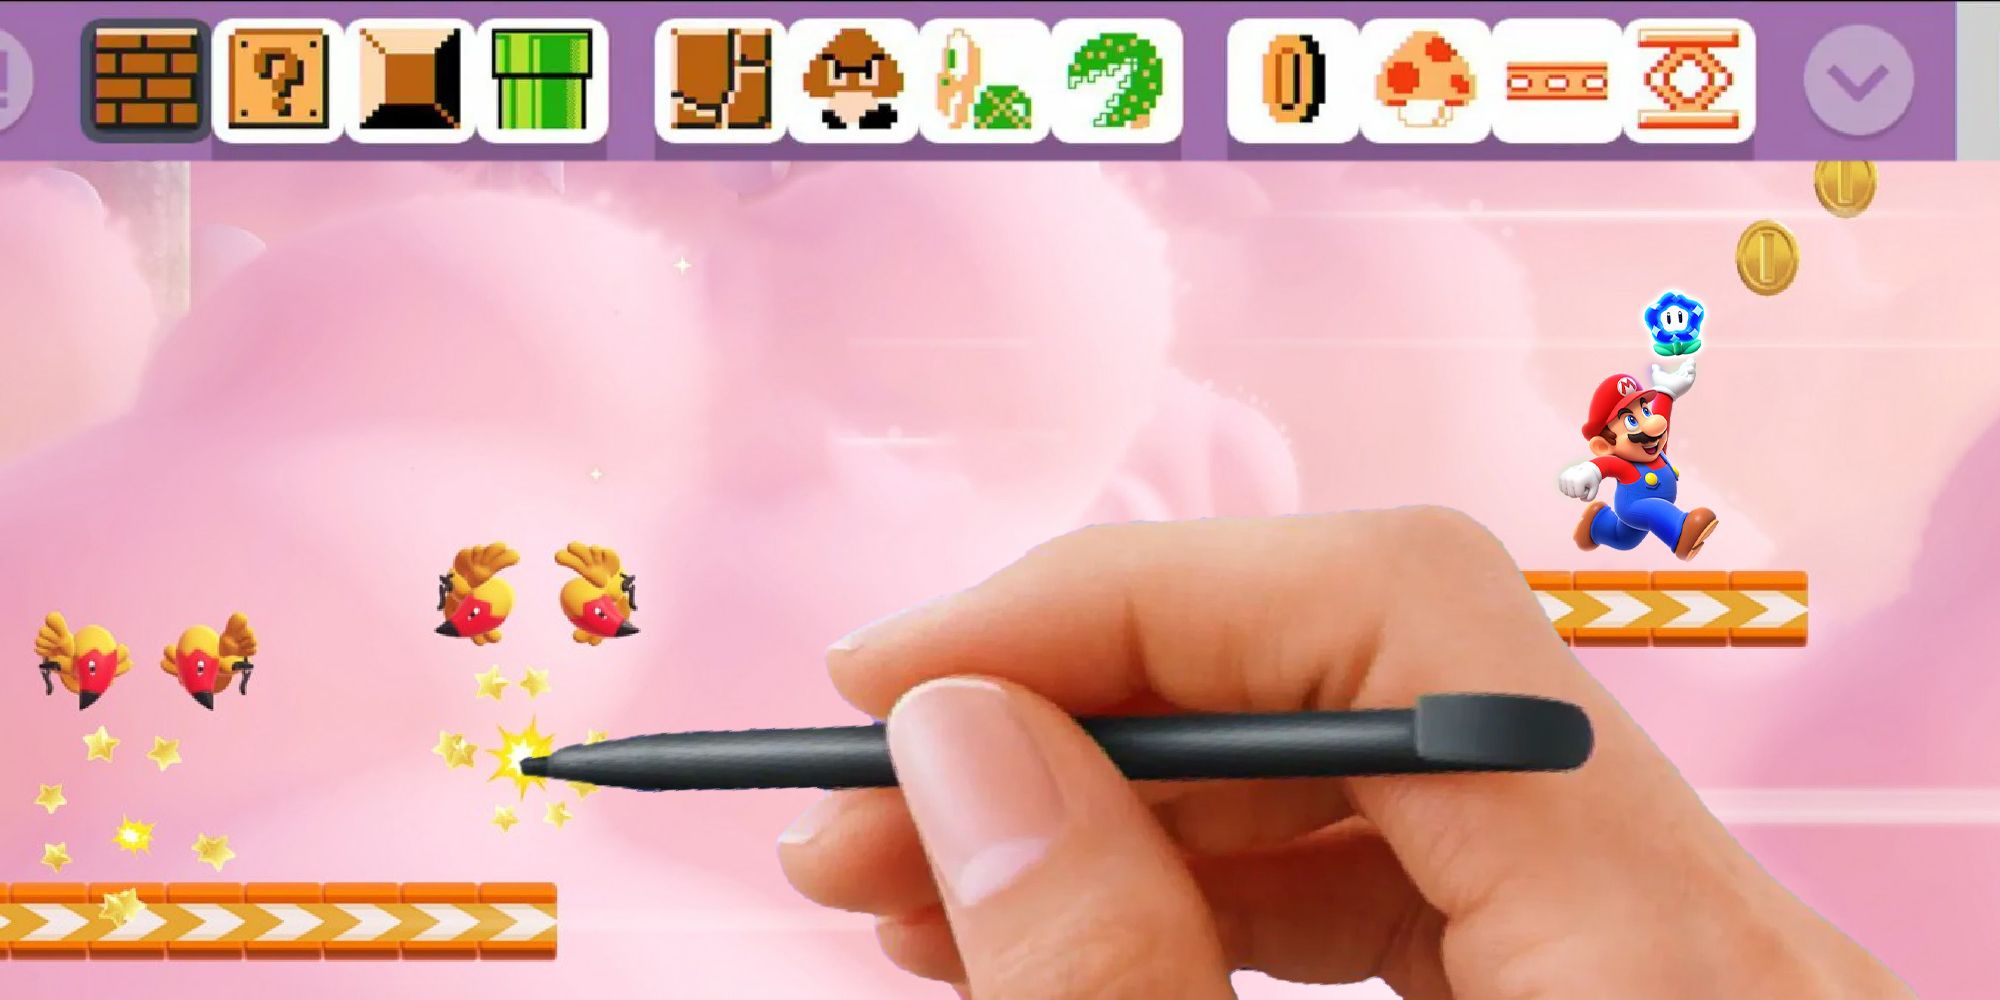 Super Mario Bros. Wonder gameplay with the Super Mario Maker HUD and a player's hand and stylus overlaid on top of it.